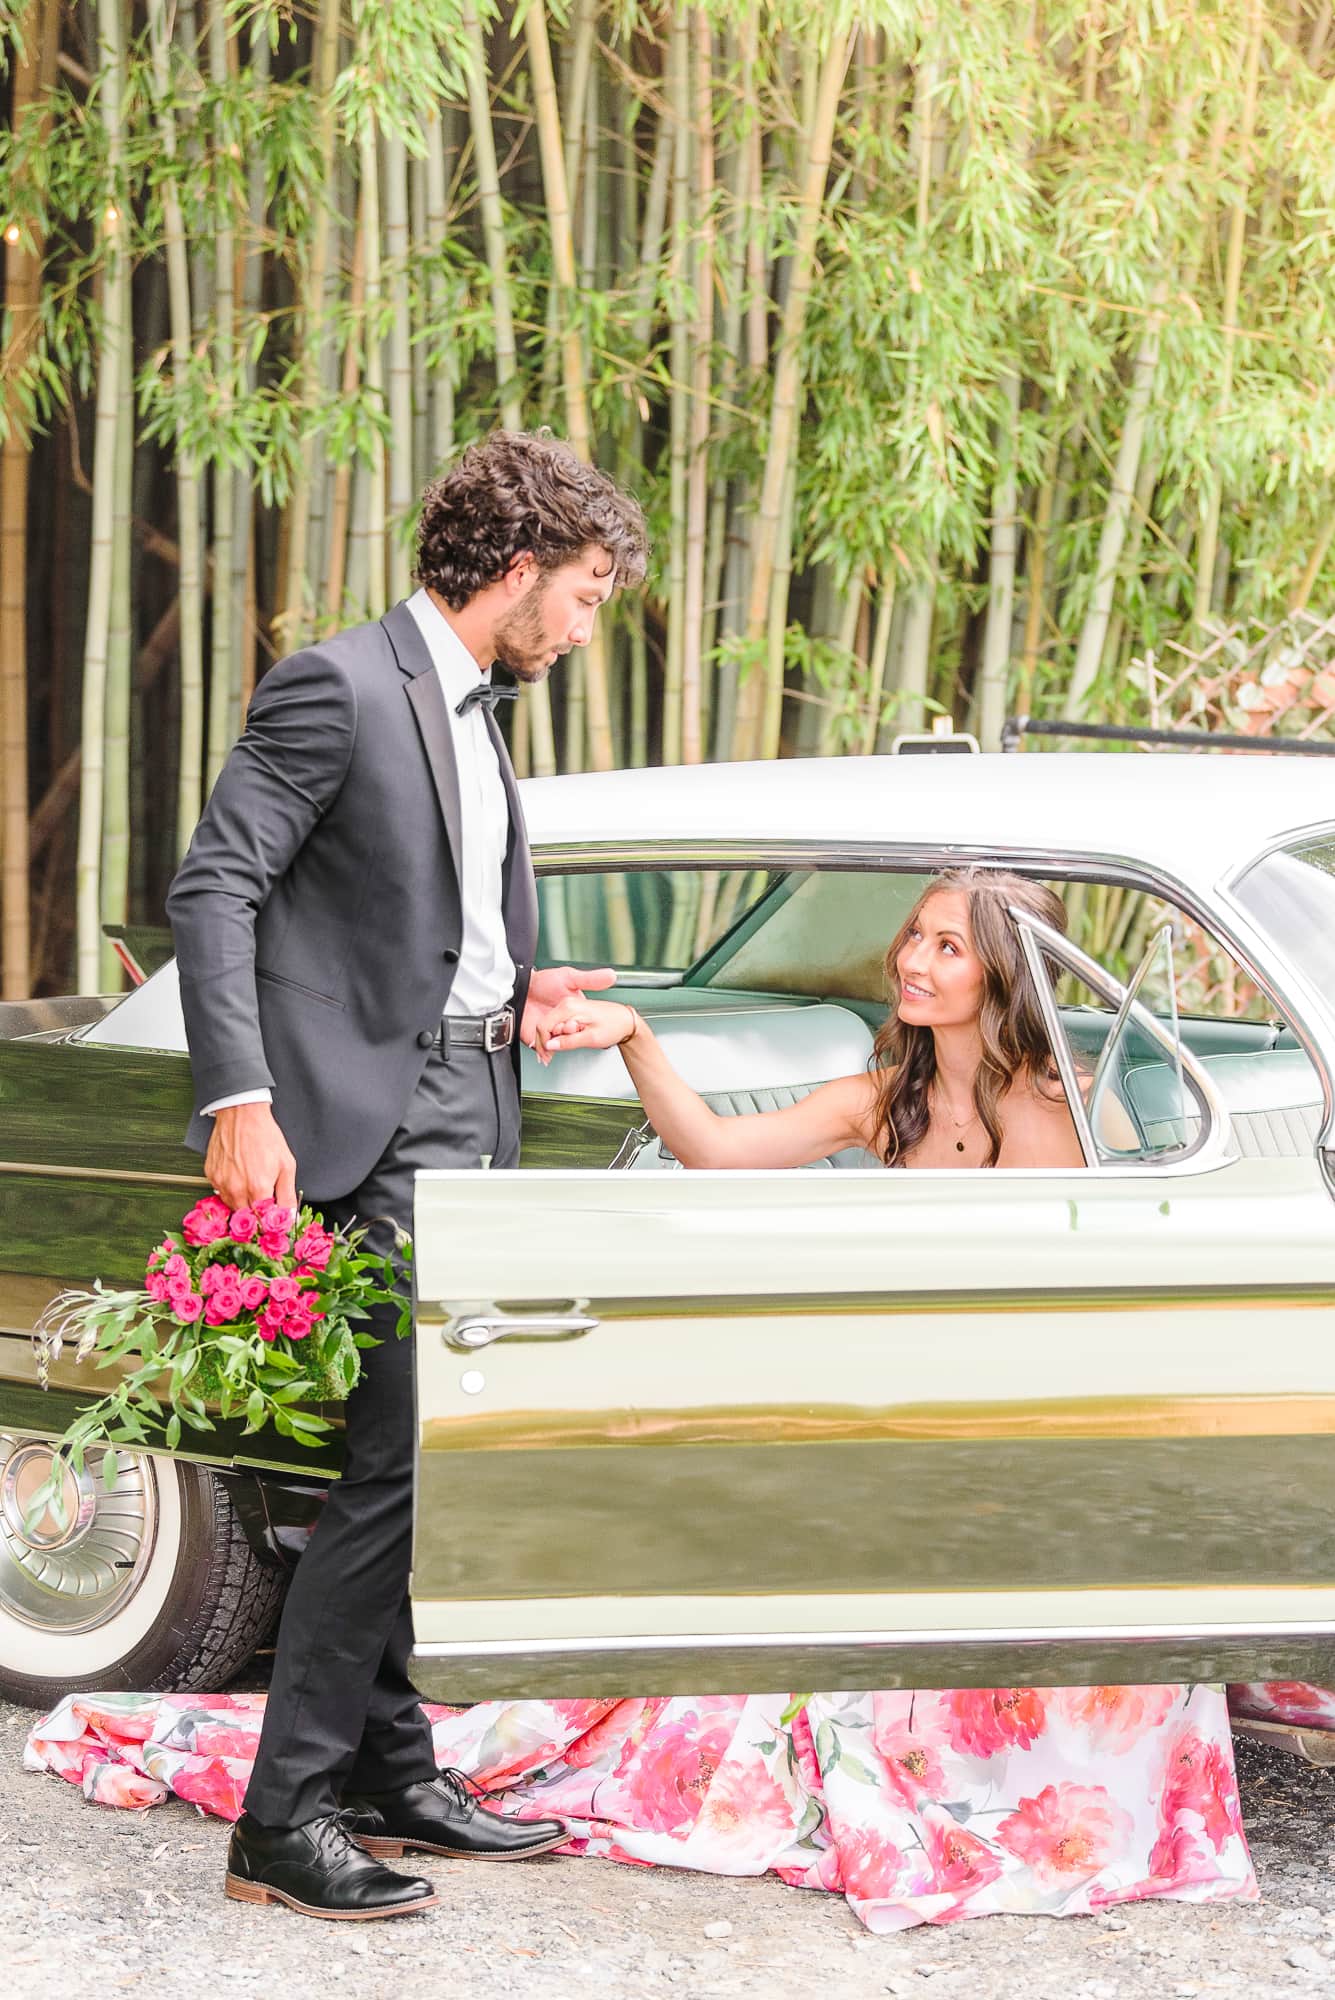 Trevor helps Kaelyn out of a green Cadillac car at a Belmont NC wedding venue.